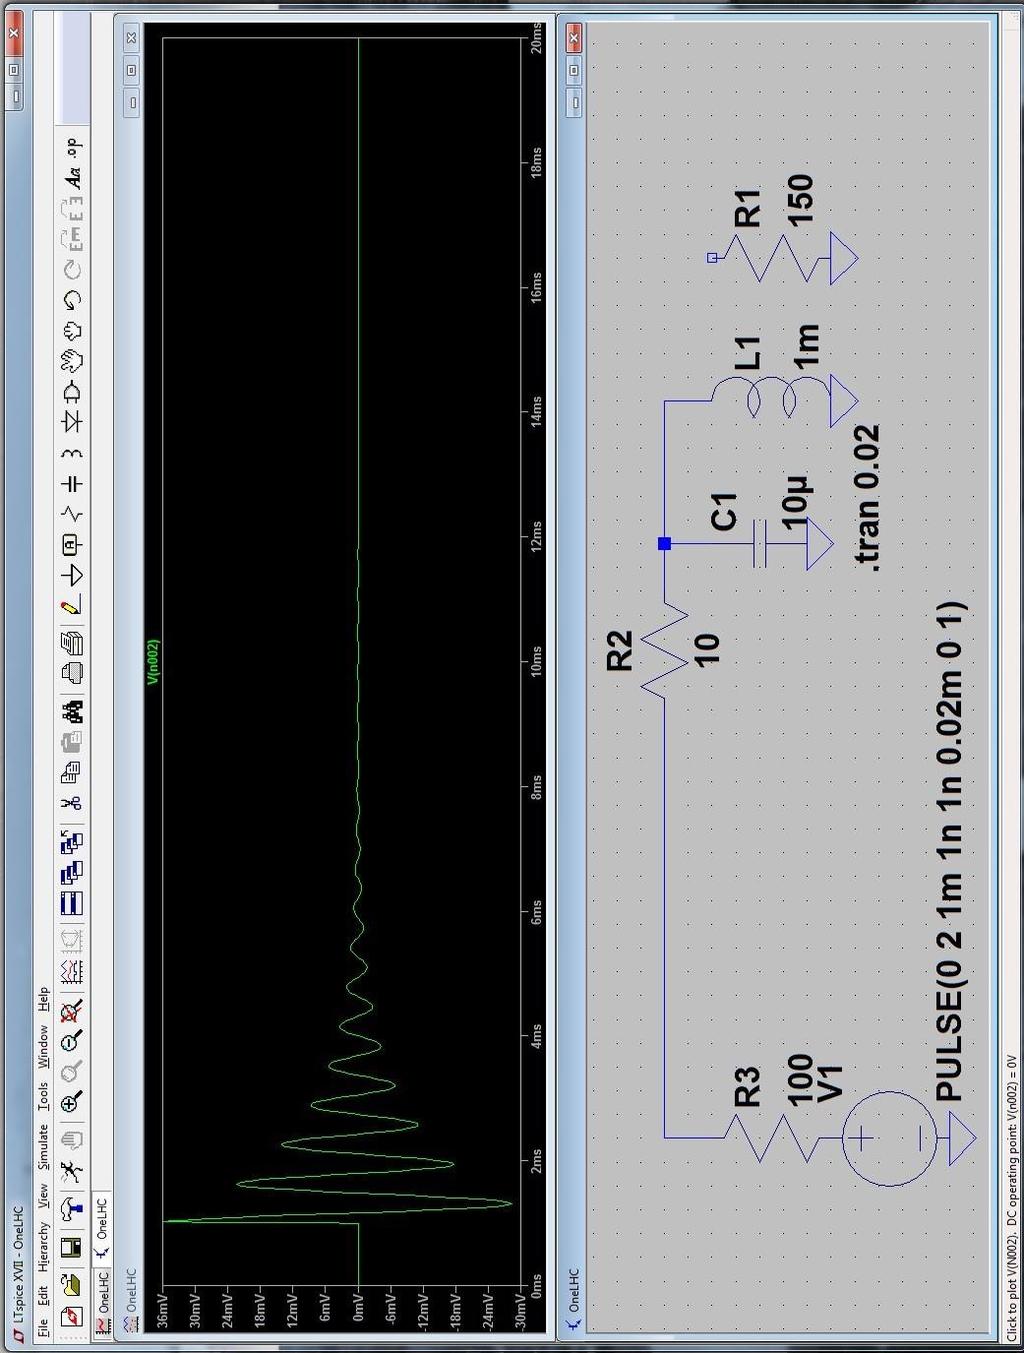 LTspice simulation: The snapshot below shows the schematic (one beam) and